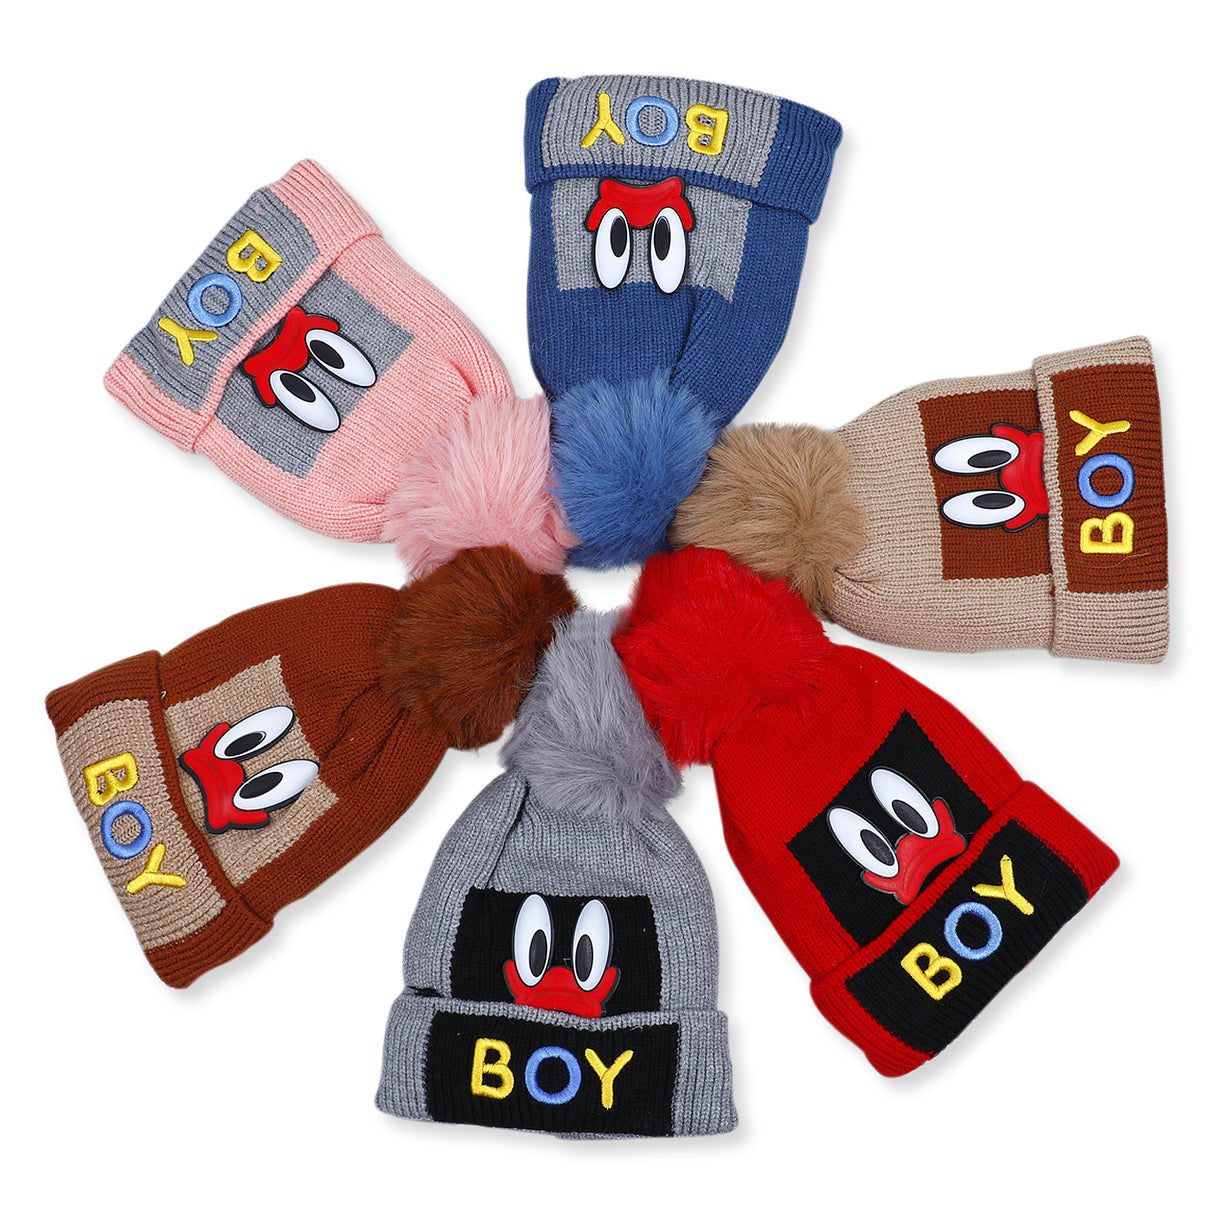 Boy Soft And Stretchable Woollen Cap